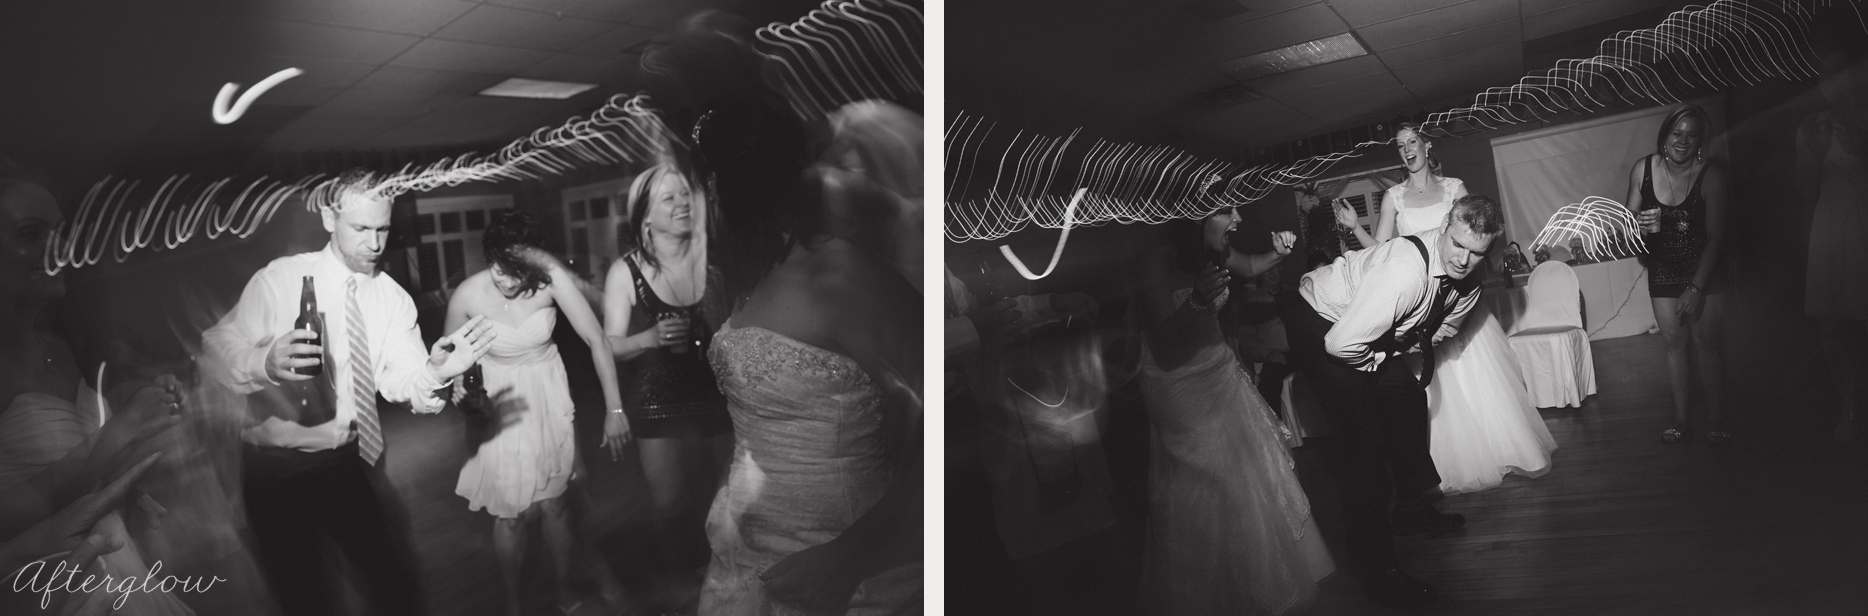 dancing the night away at henley wedding reception